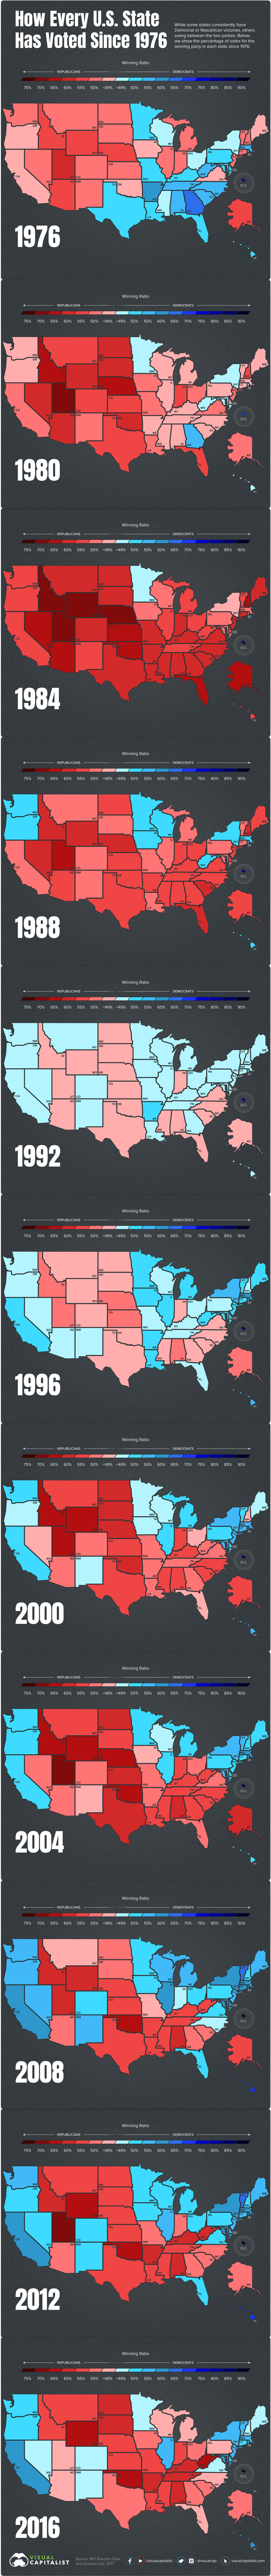 Animated Map: U.S. Presidential Voting History by State (1976-2016)